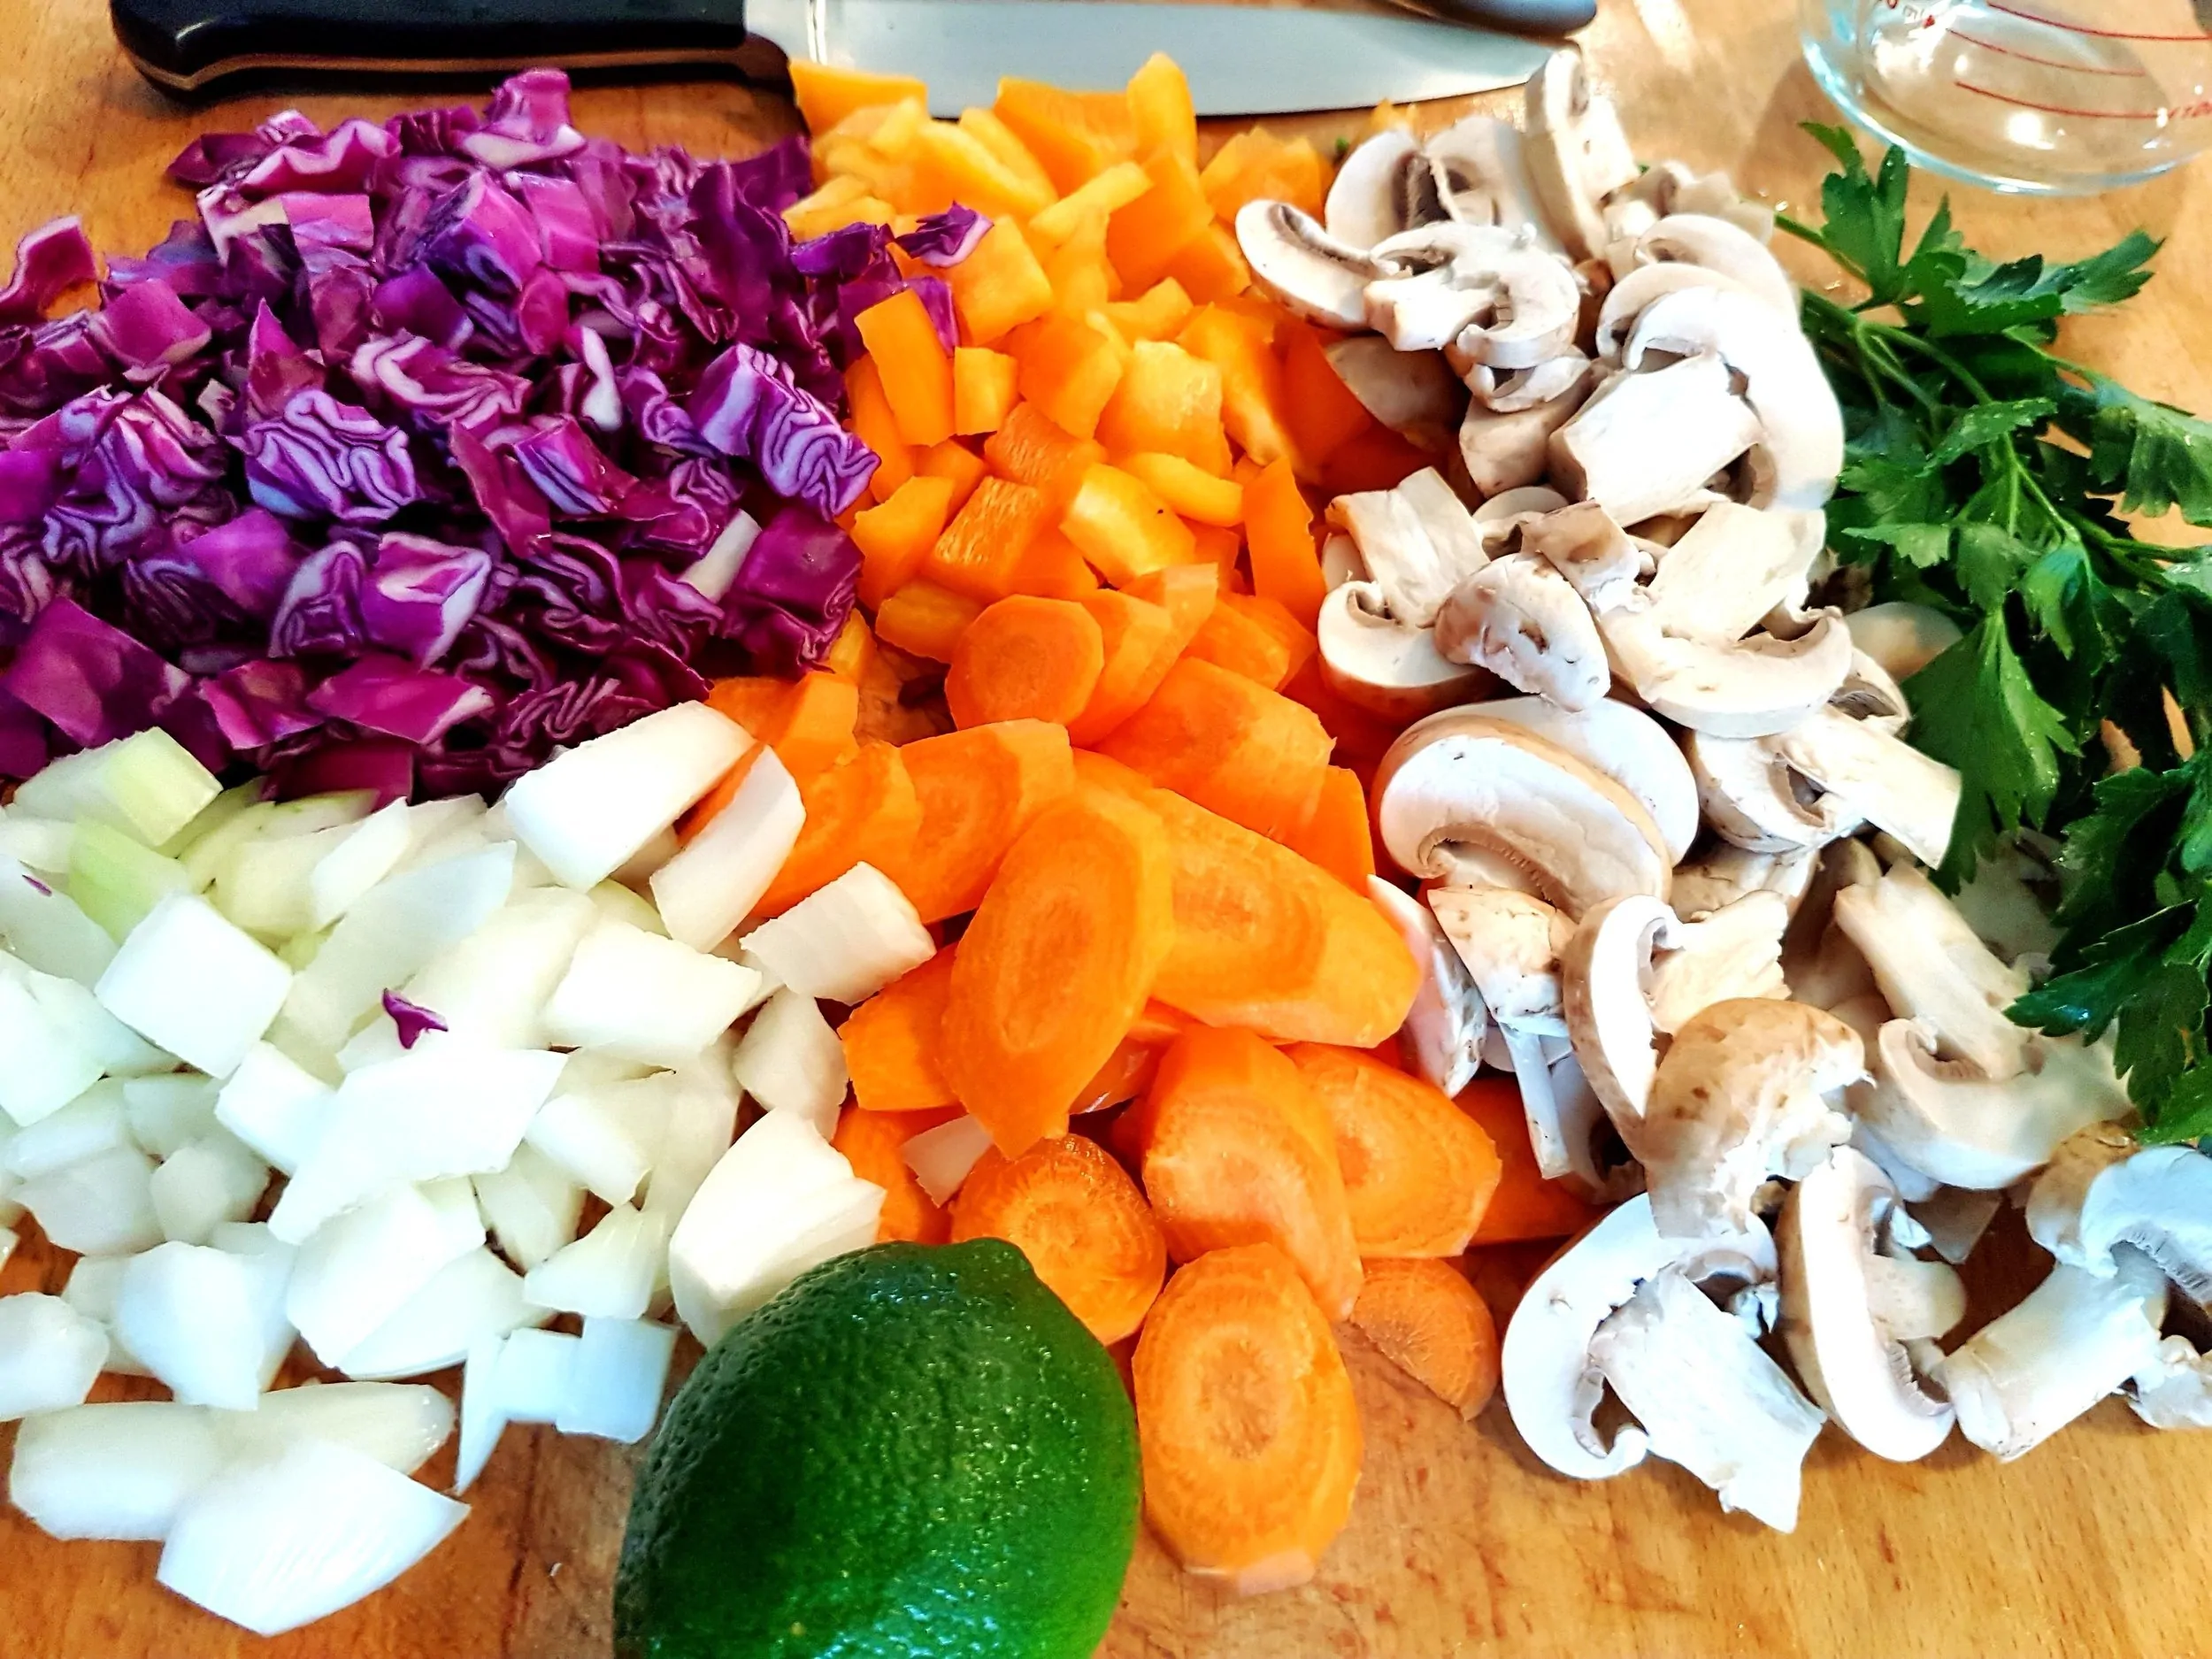 Onions, cabbage, carrots, and mushrooms lined up on a cutting board.